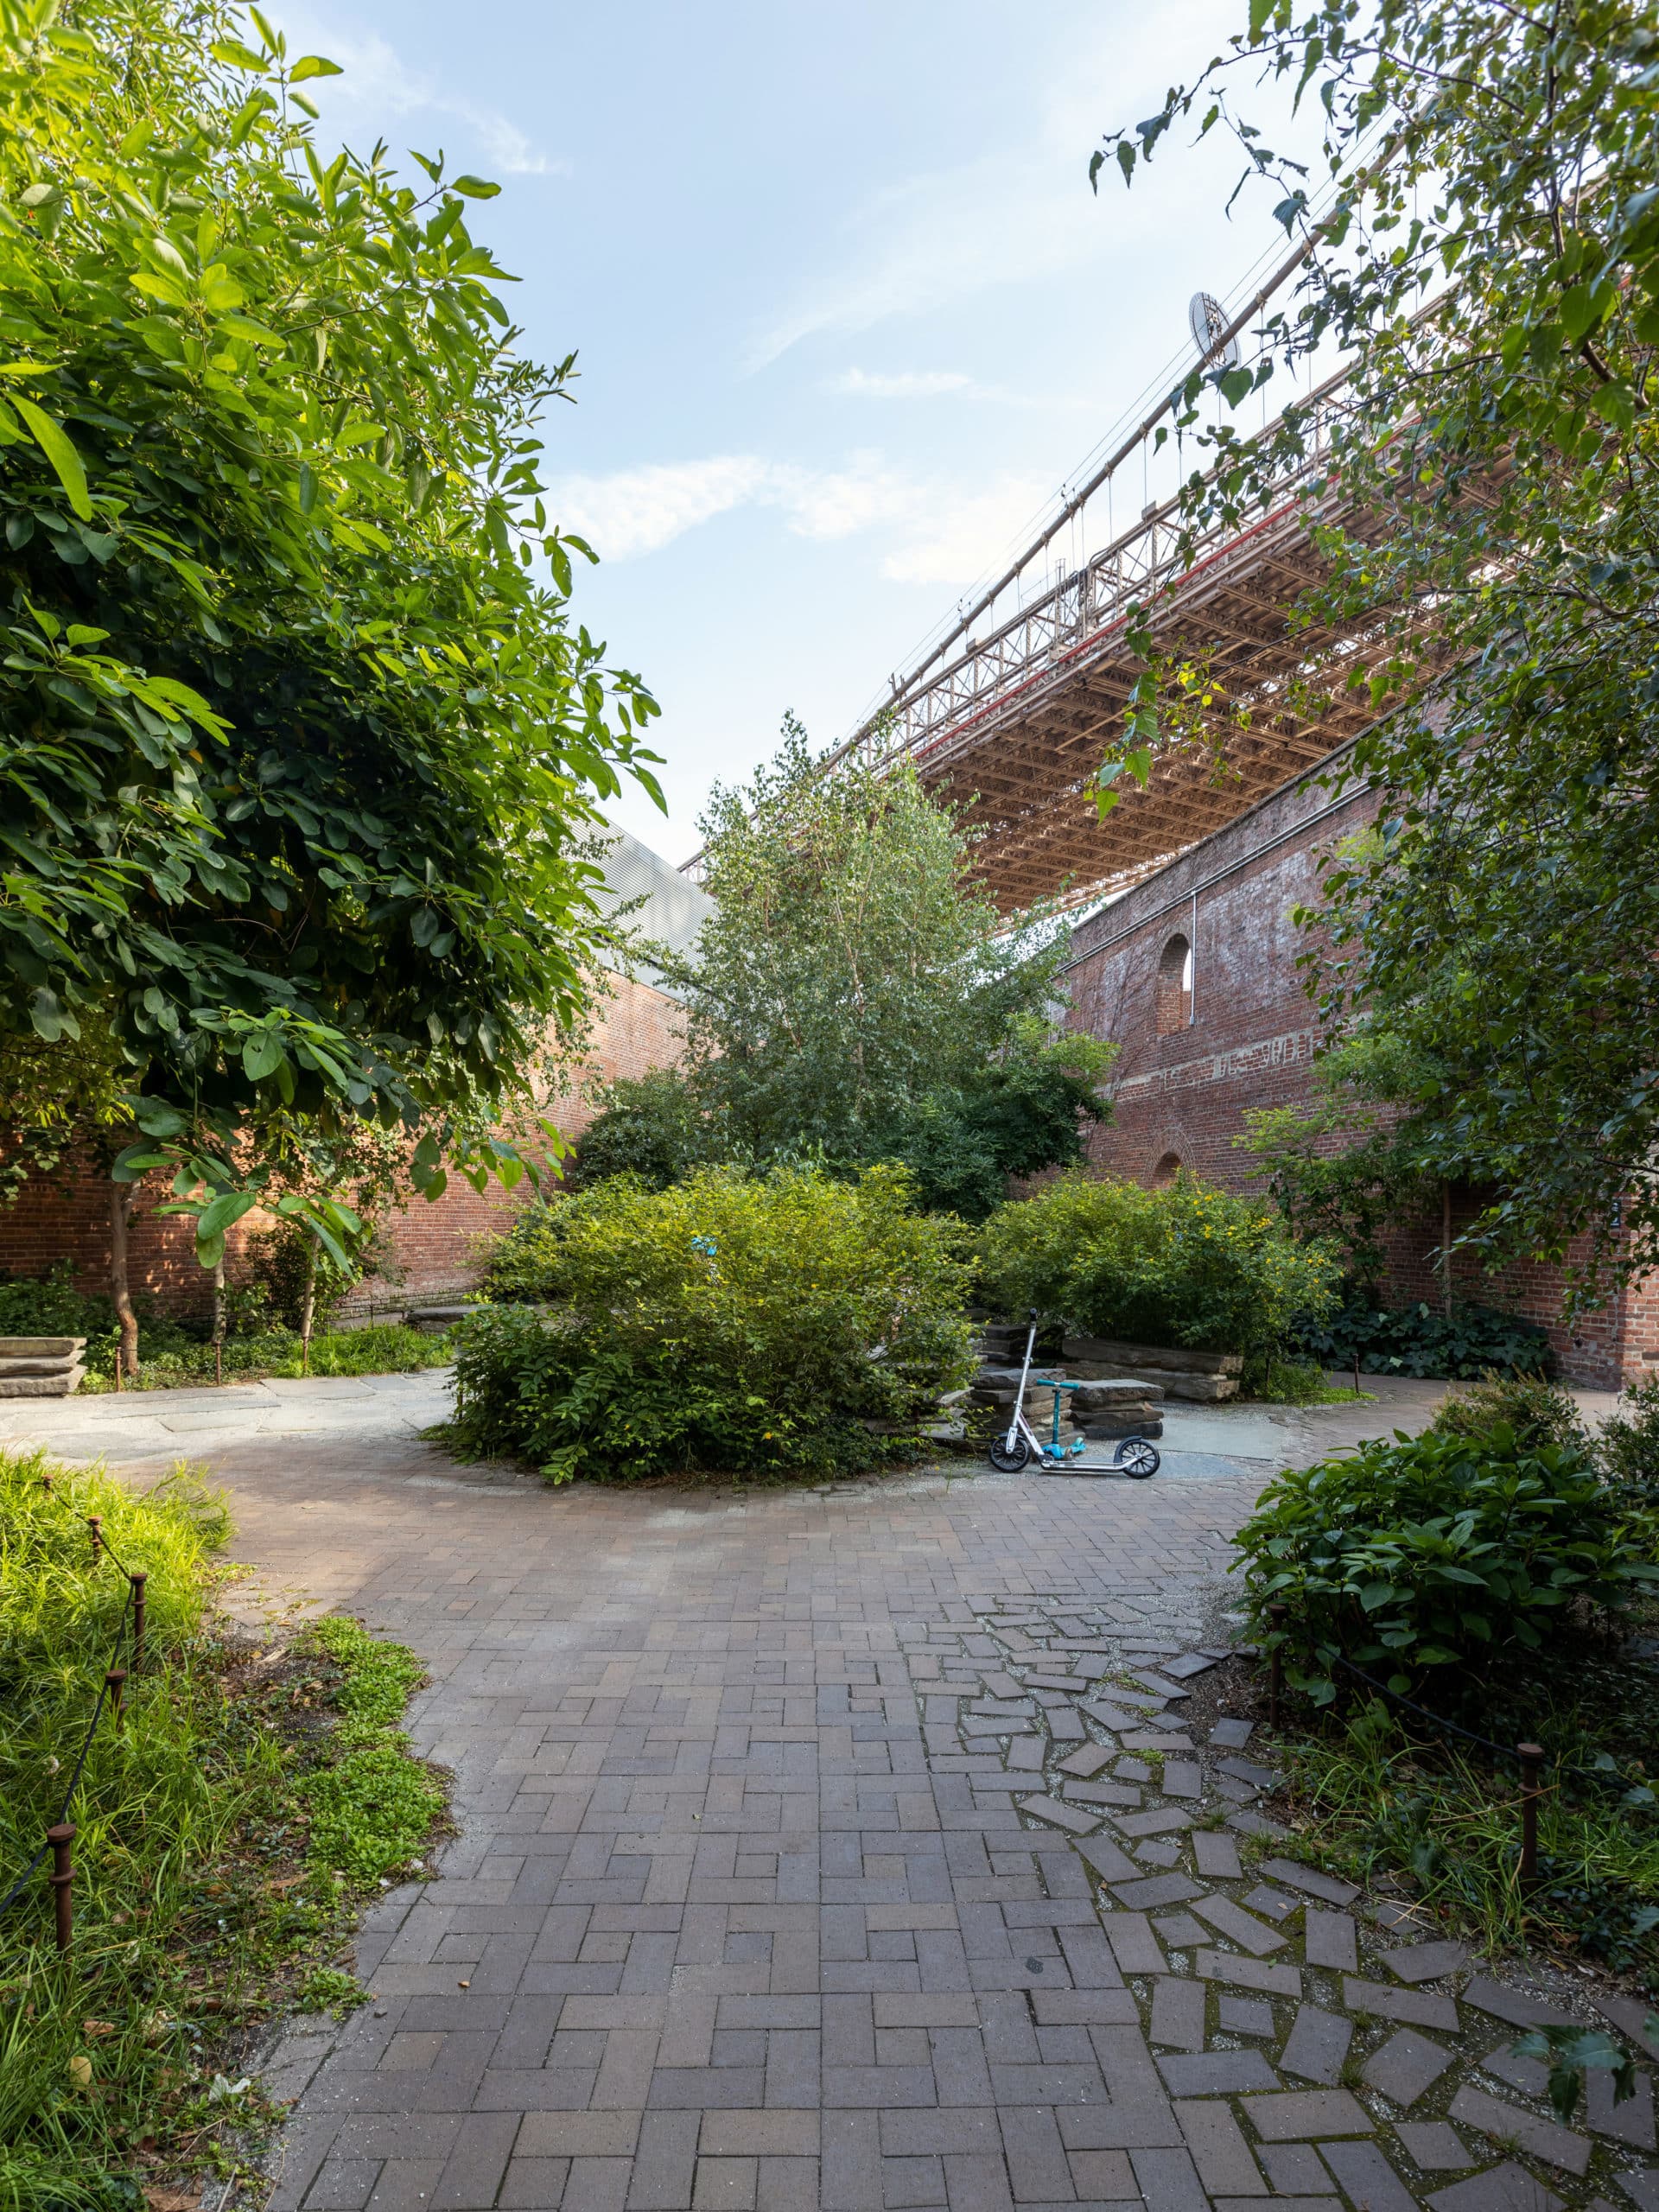 Trees and bushes along the pathways in the Max Family Garden at sunset. The Brooklyn Bridge is seen overhead.